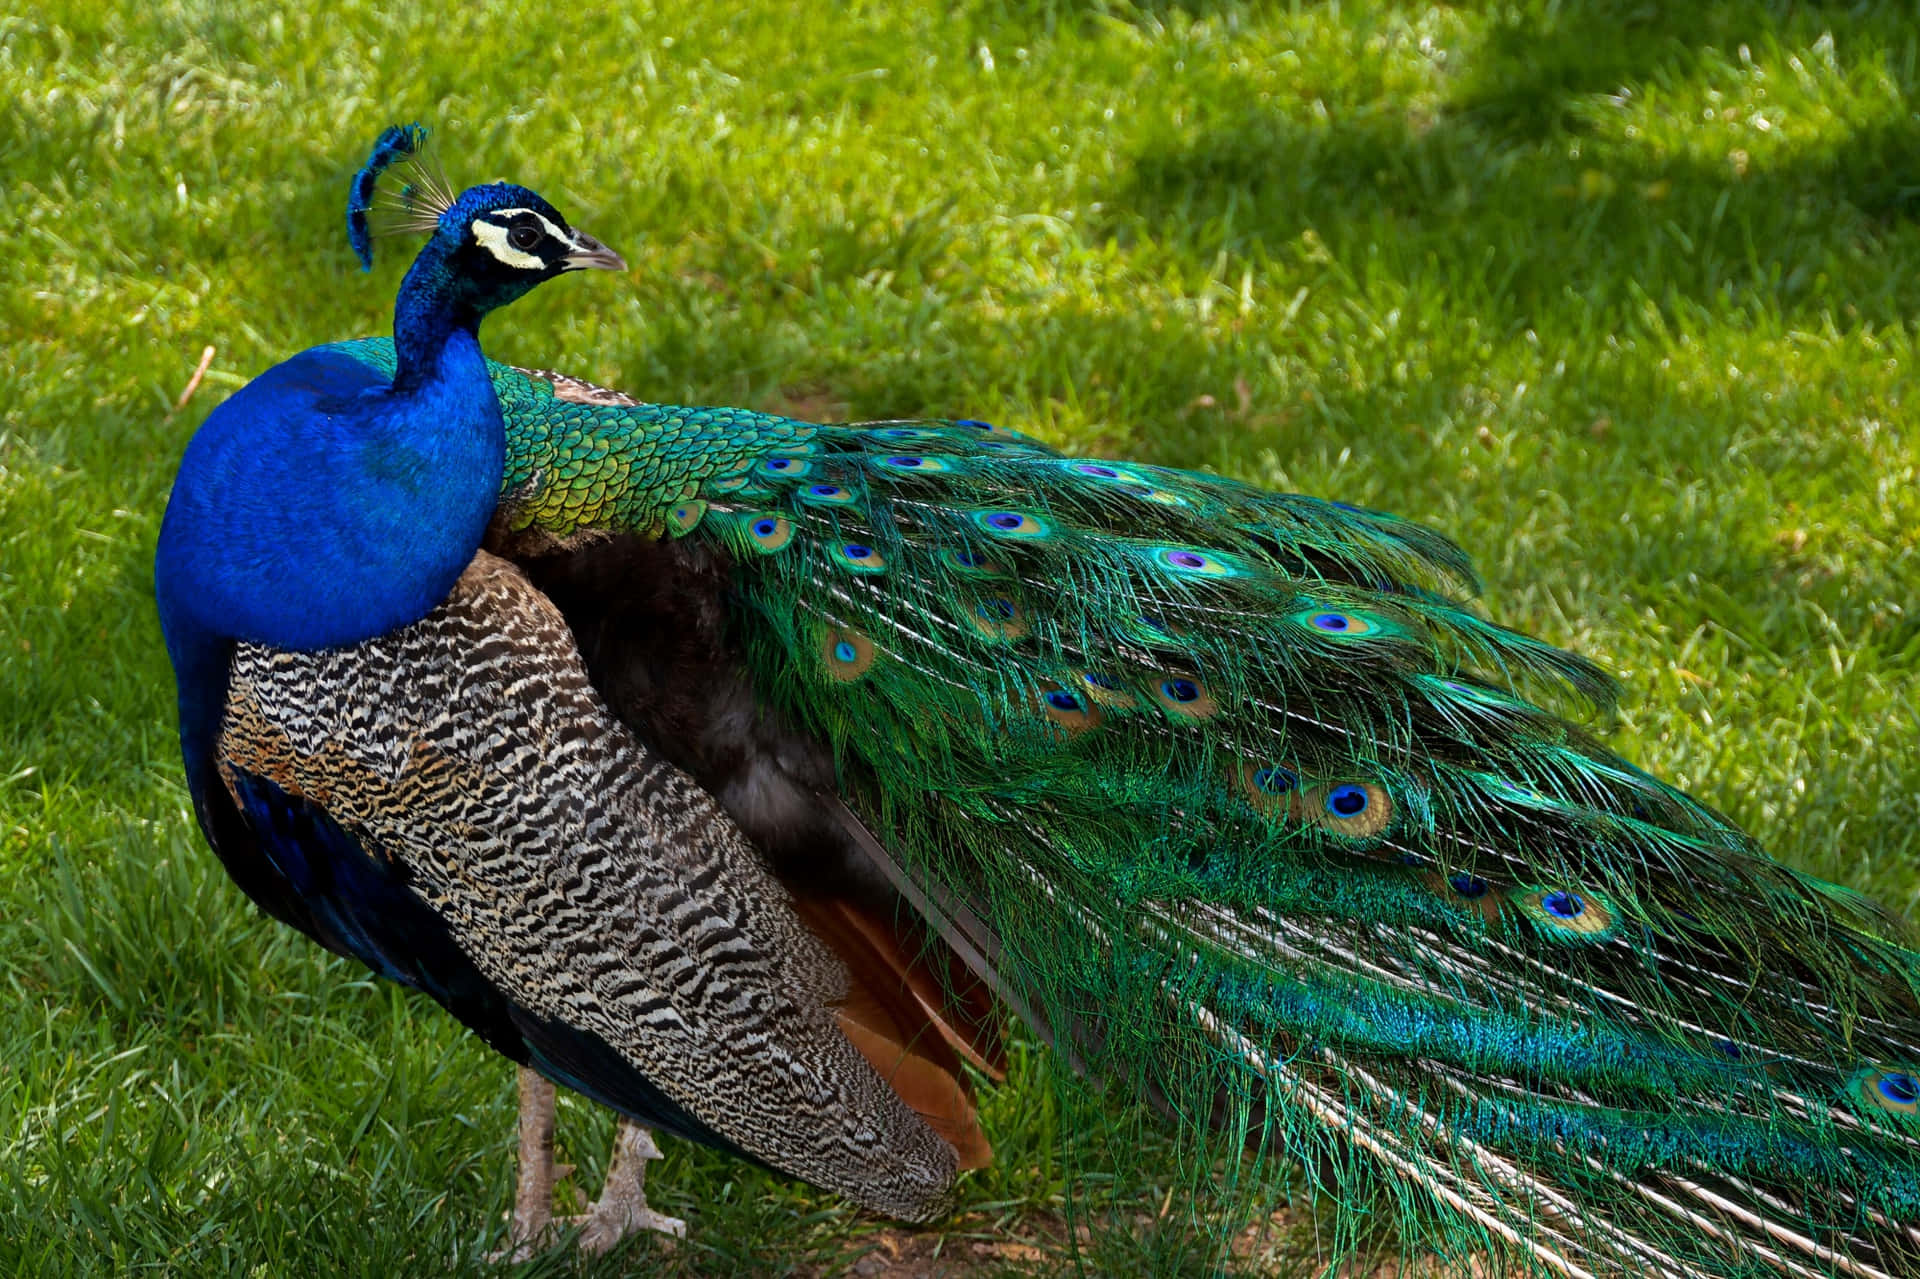 Marvelous Plumage of a Peacock Bird